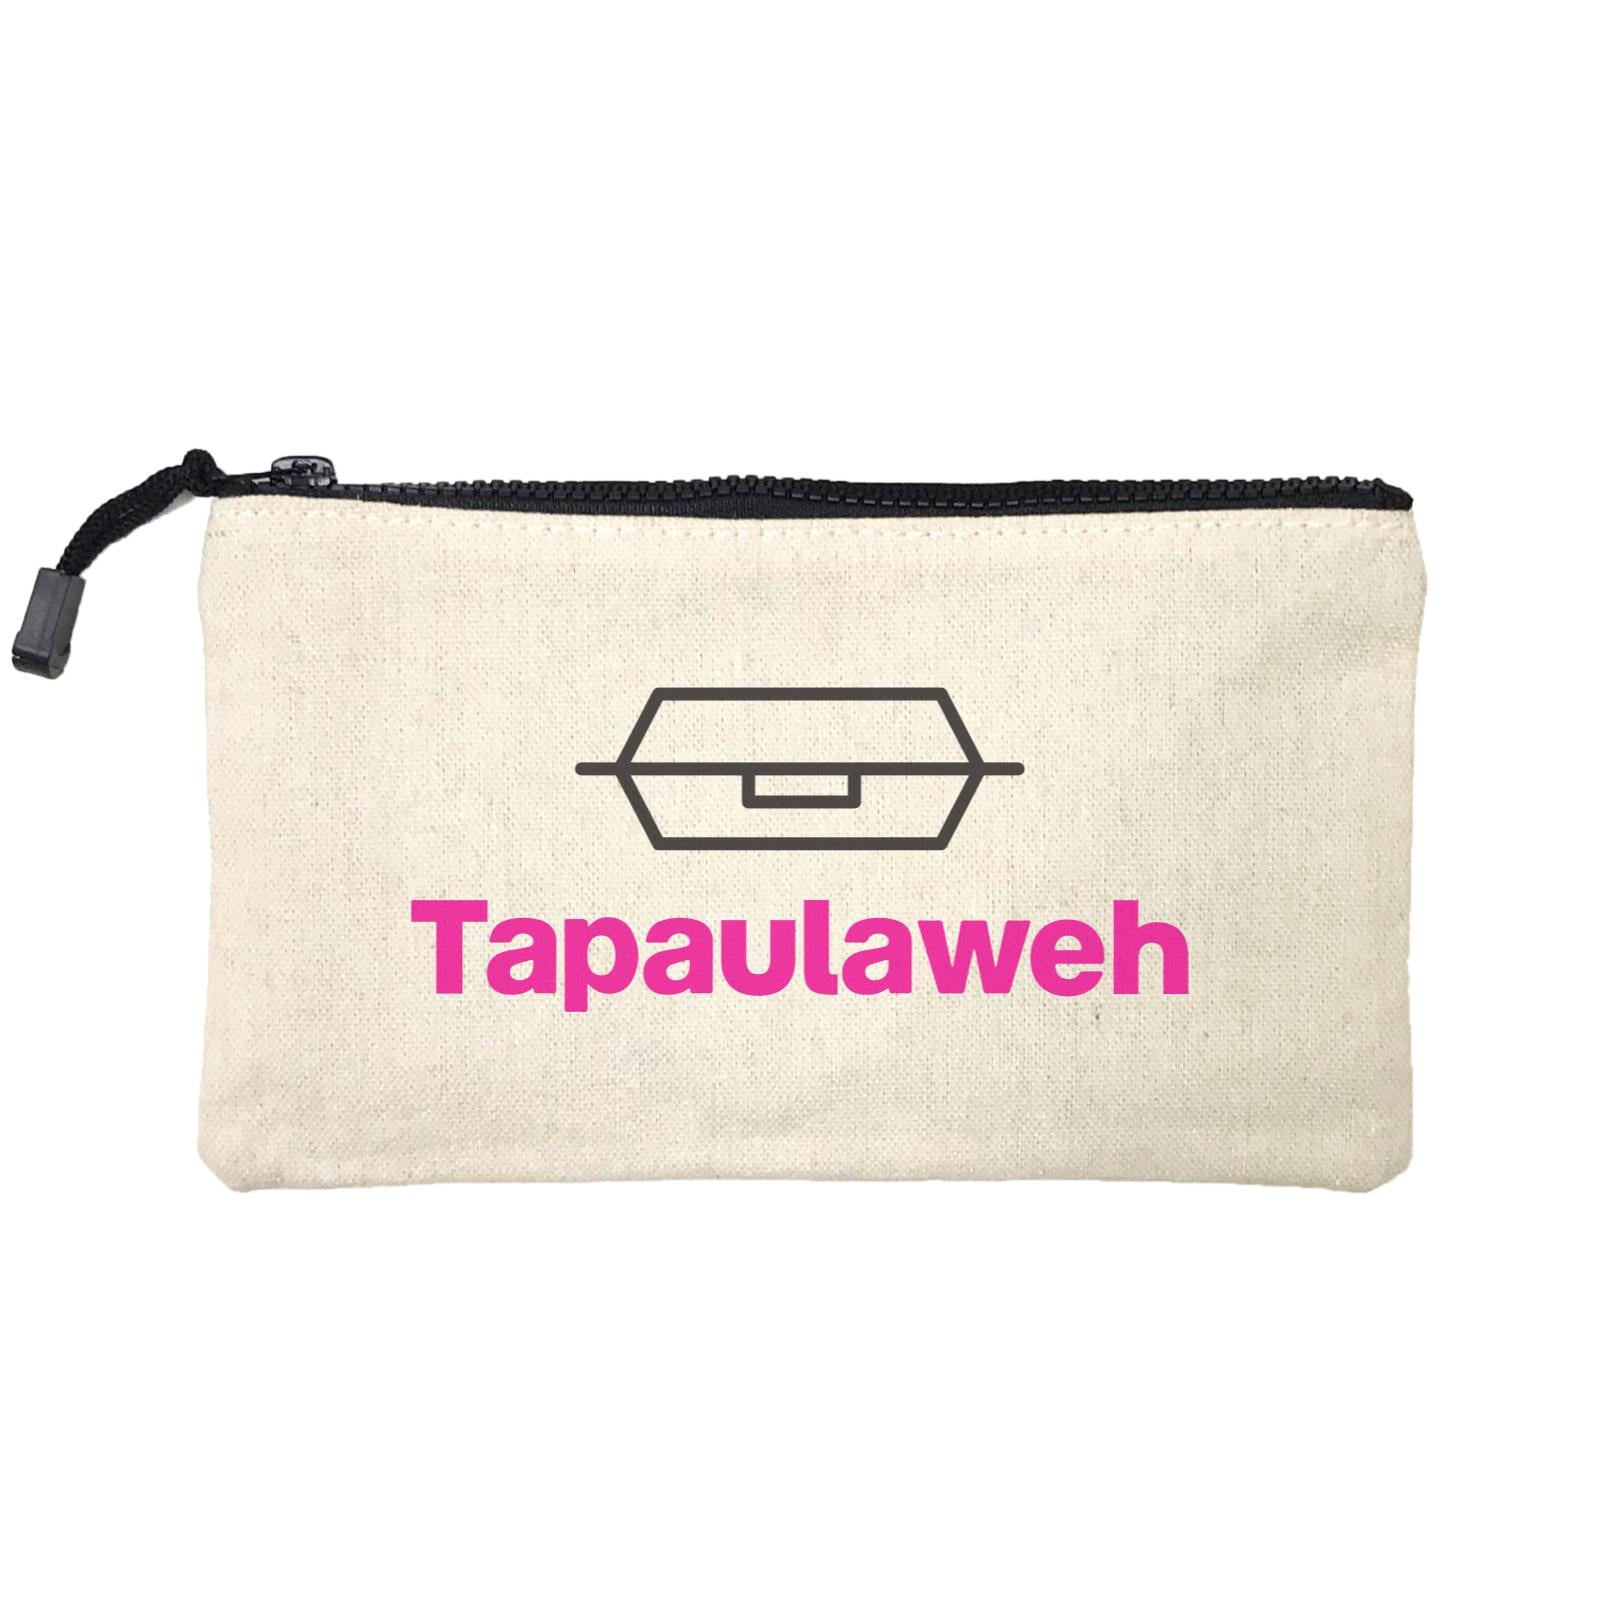 Slang Statement Tapaulaweh SP Stationery Pouch